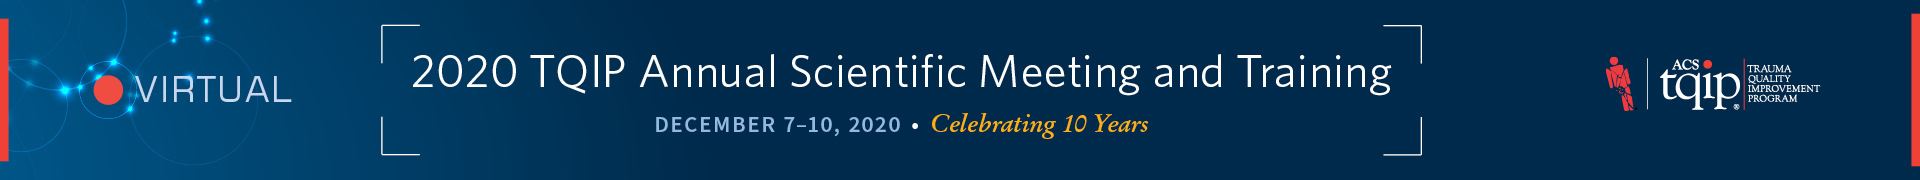 2020 TQIP Annual Scientific Meeting and Training Event Banner